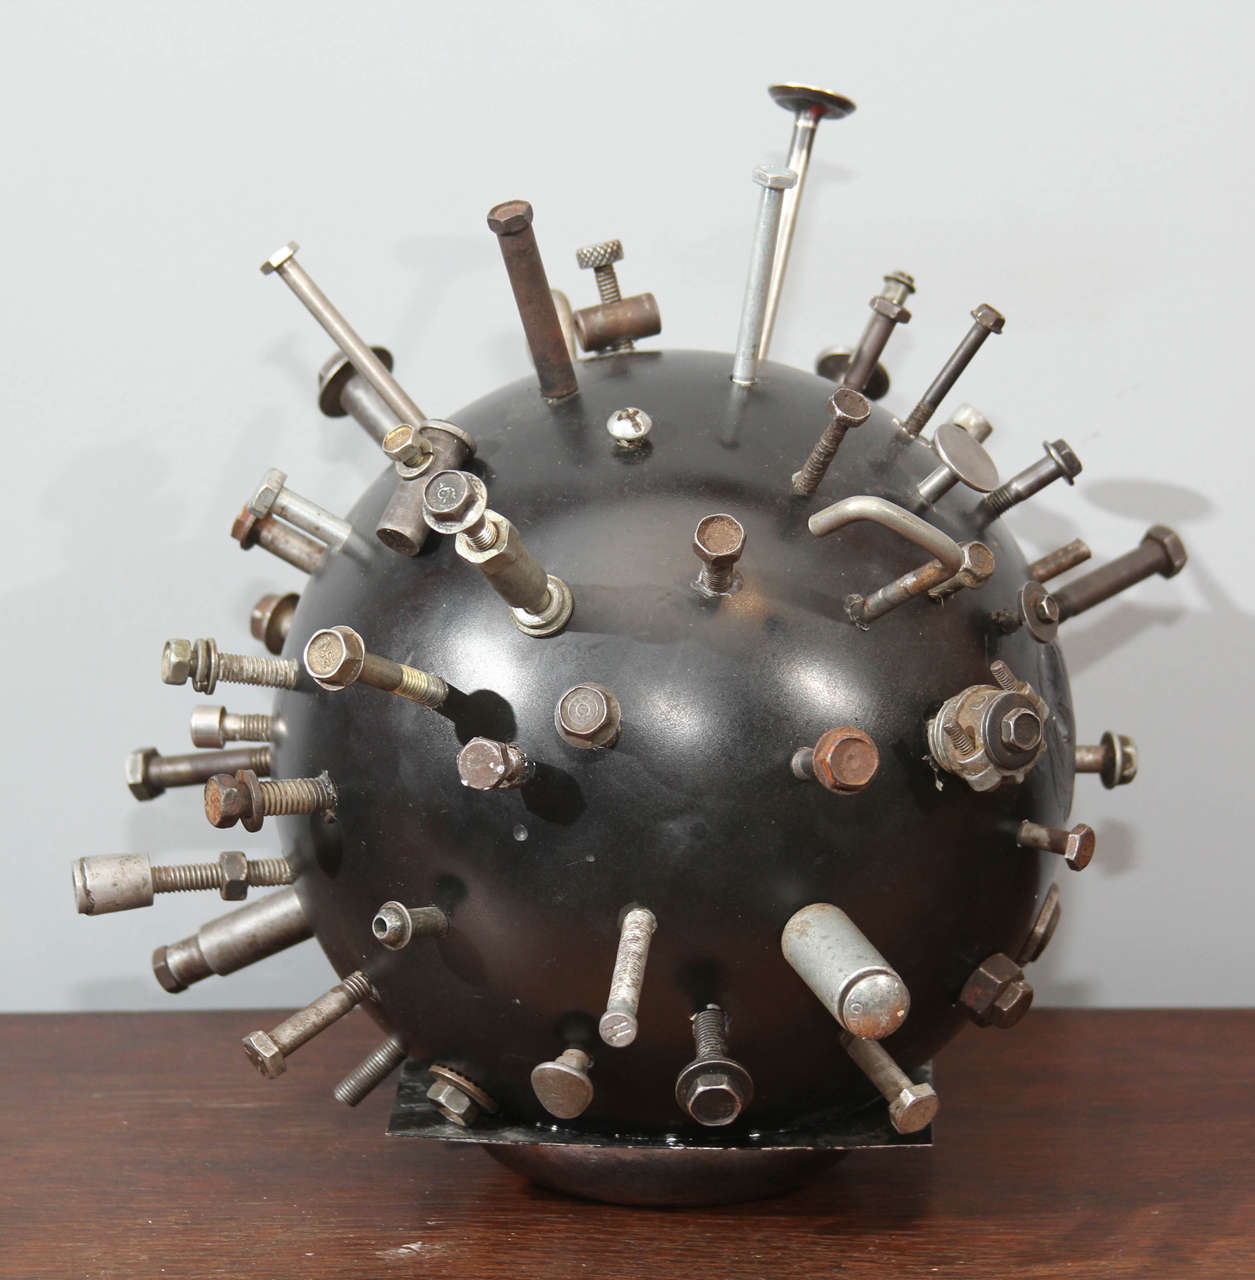 Bowling ball impaled artistically with assorted metal items
great piece of Folk Art for table or shelf.